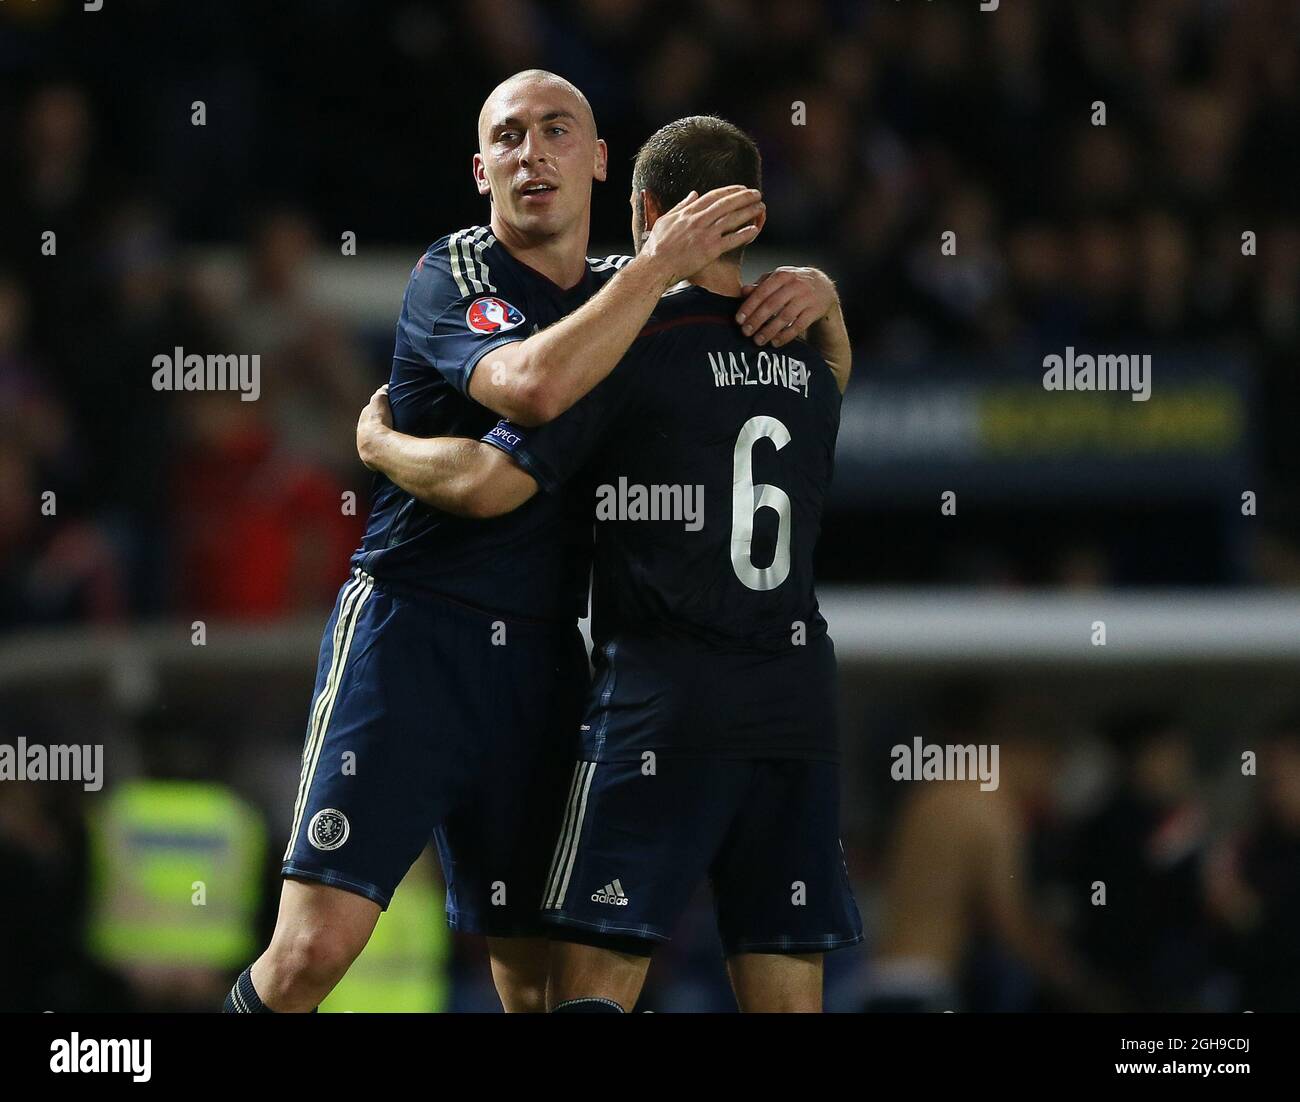 Man of the match Scott Brown of Scotland hugs winning goalscorer Shaun Maloney of Scotland at the end of the match during the Euro 2016 Qualifying Group D match between Scotland and Georgia at the Ibrox Stadium in England on October 11, 2014. Stock Photo